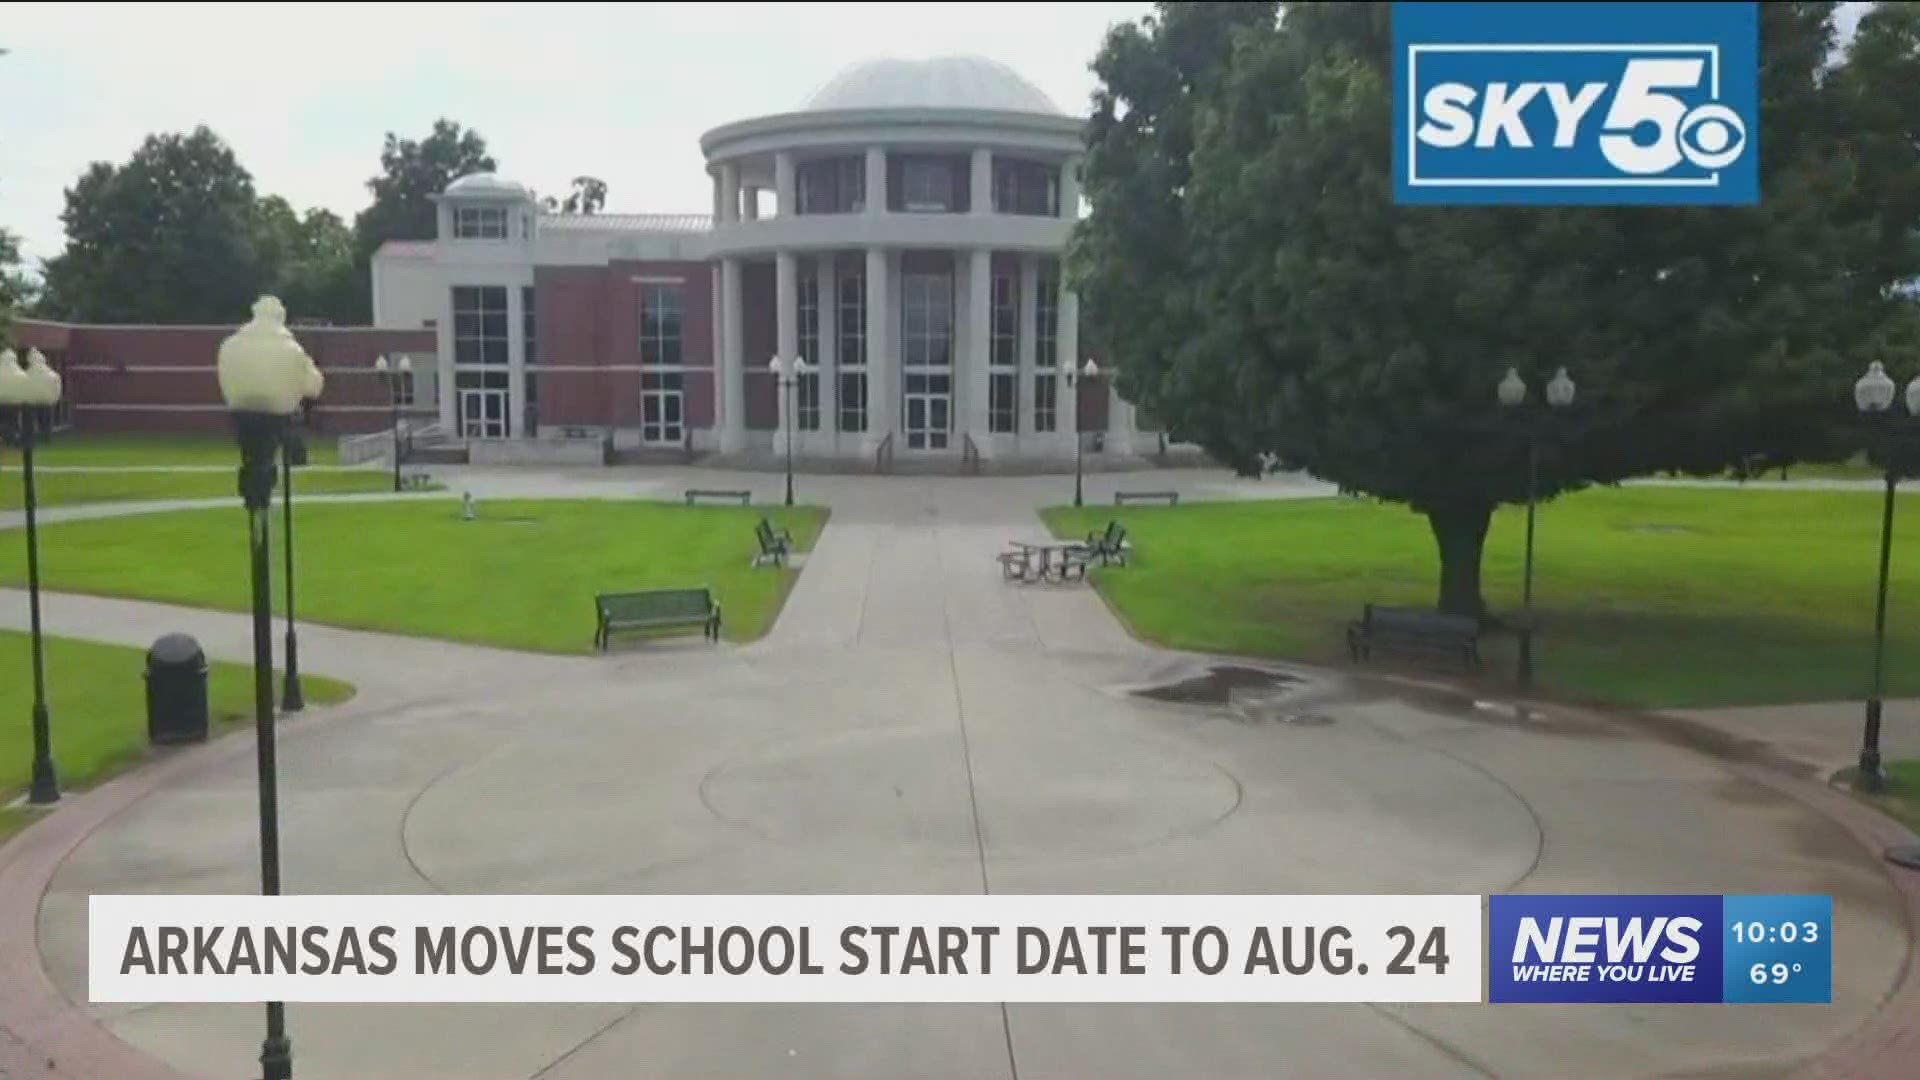 Arkansas moves school starting date to August 24